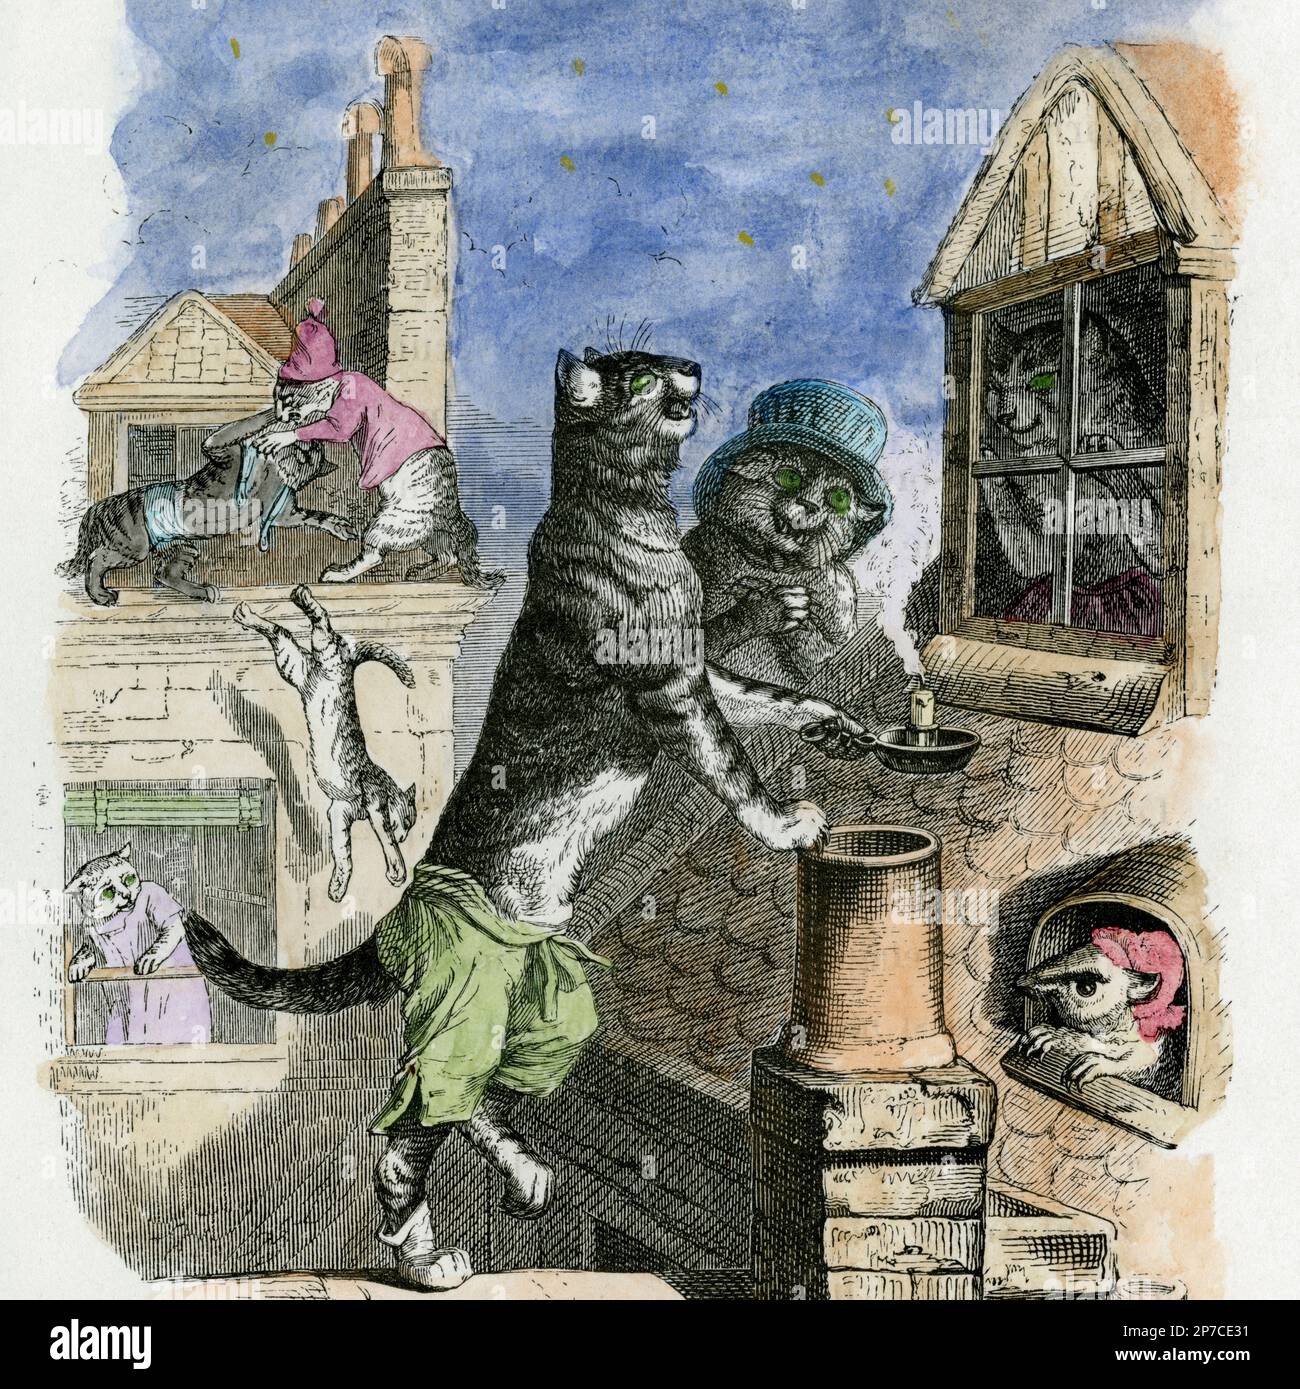 On a starry French night, green-eyed cats serenade a potential lover through rooftop gable glass: square format detail of charming hand-tinted 19th century book illustration by J.J. Grandville, more widely known for biting political caricatures, satirical drawings and republican campaigns.  From ‘Scenes of the Private and Public Life of Animals’ (Paris, 1842), which depicted humans as animals and vice versa. Stock Photo